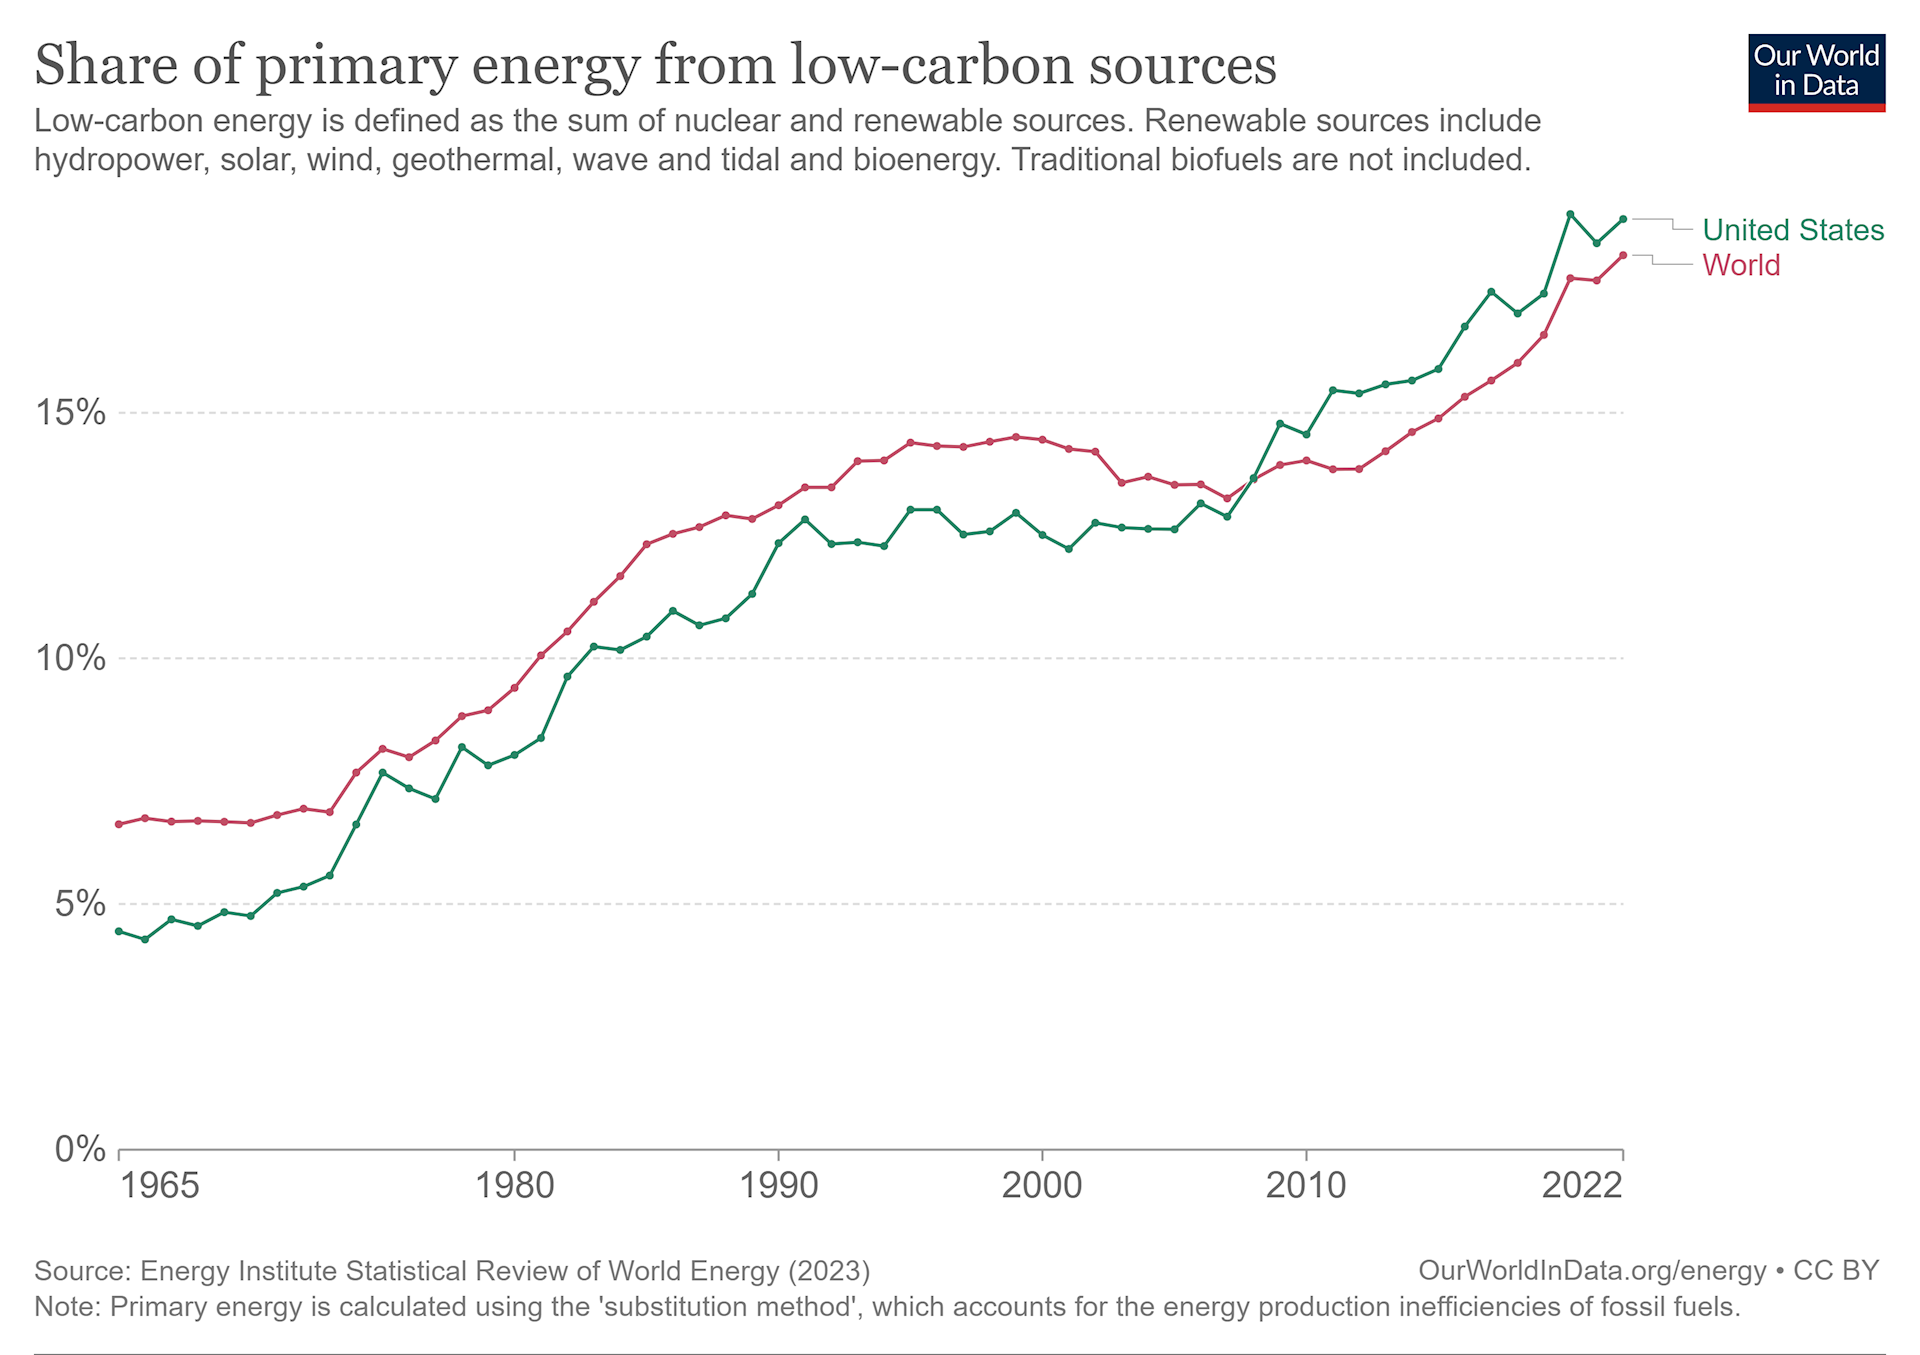 graph that shows percentage share of primary energy from low-carbon sources for the U.S. and the world from 1965 to 2022, with world increasing from about 6 percent to 17 percent and U.S. increasing from about 4 percent to 18 percent